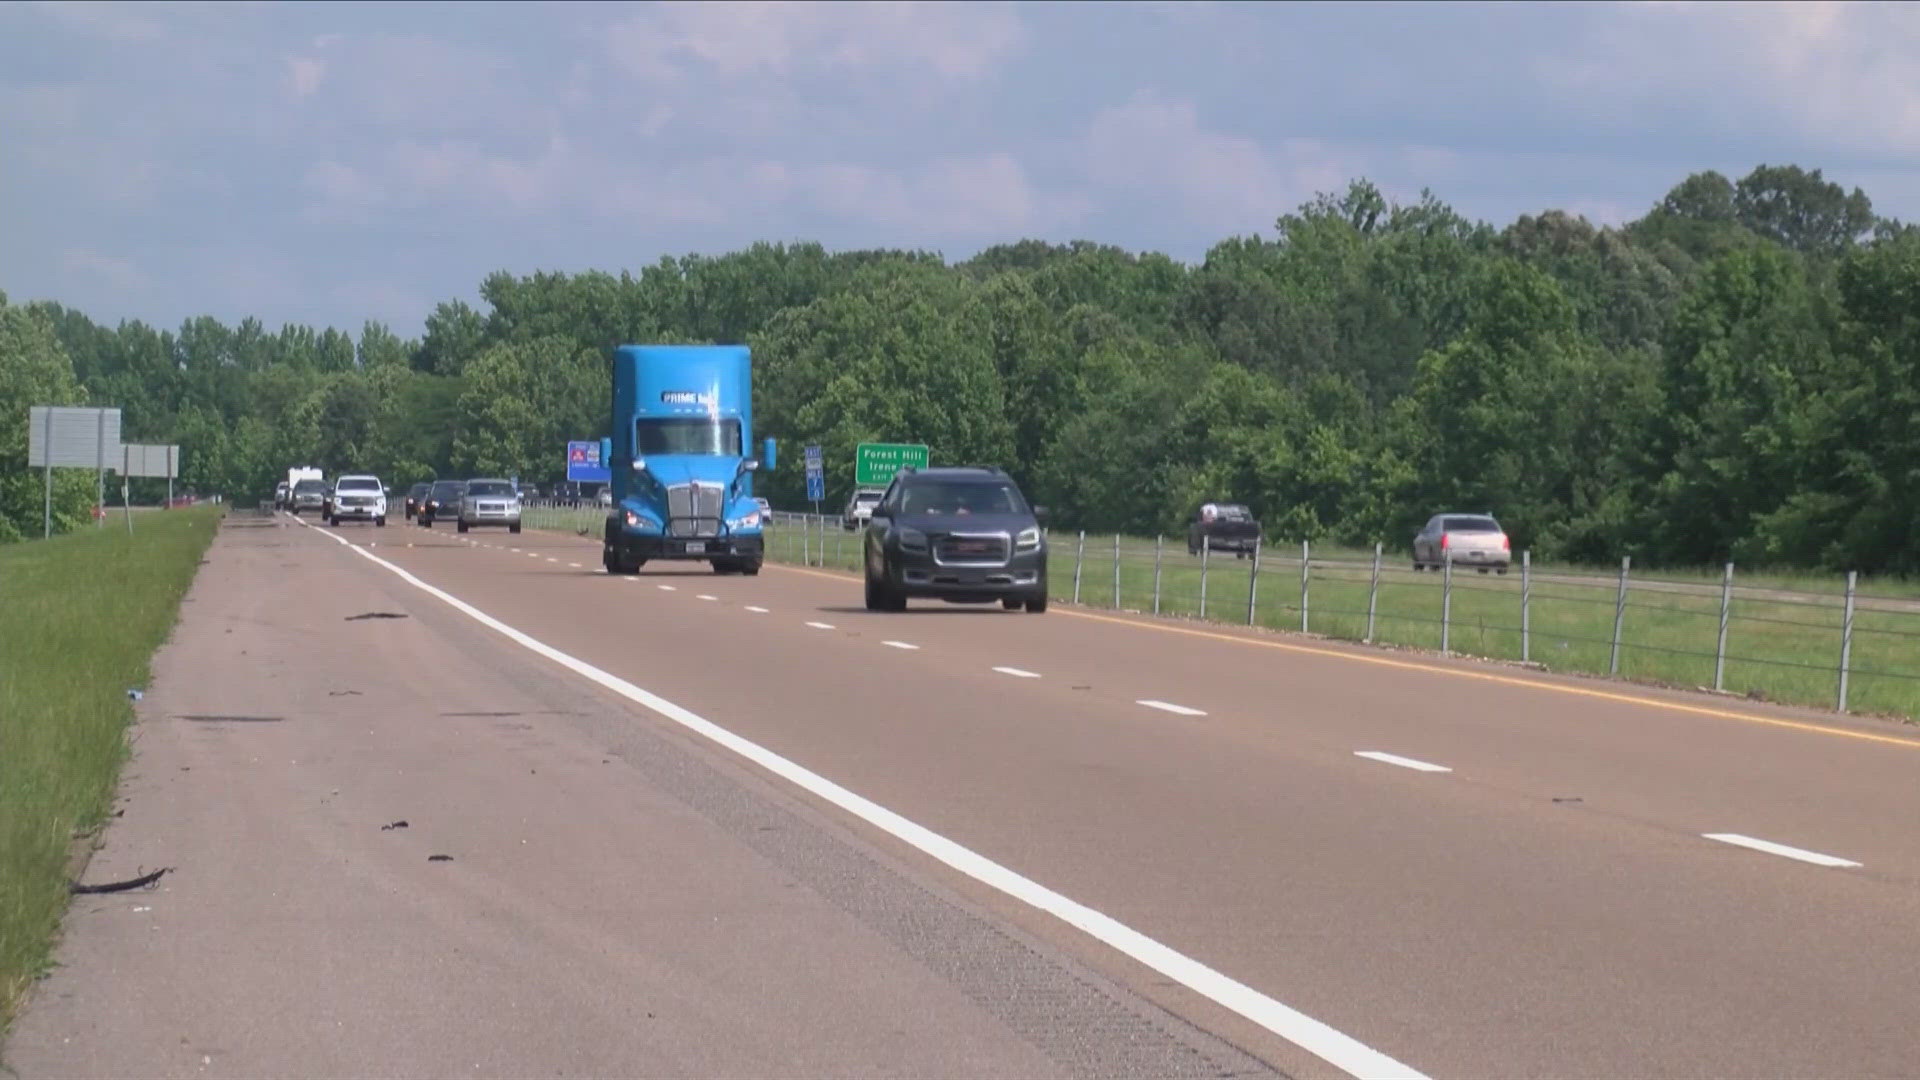 A Shelby County task force is finding ways to protect drivers.